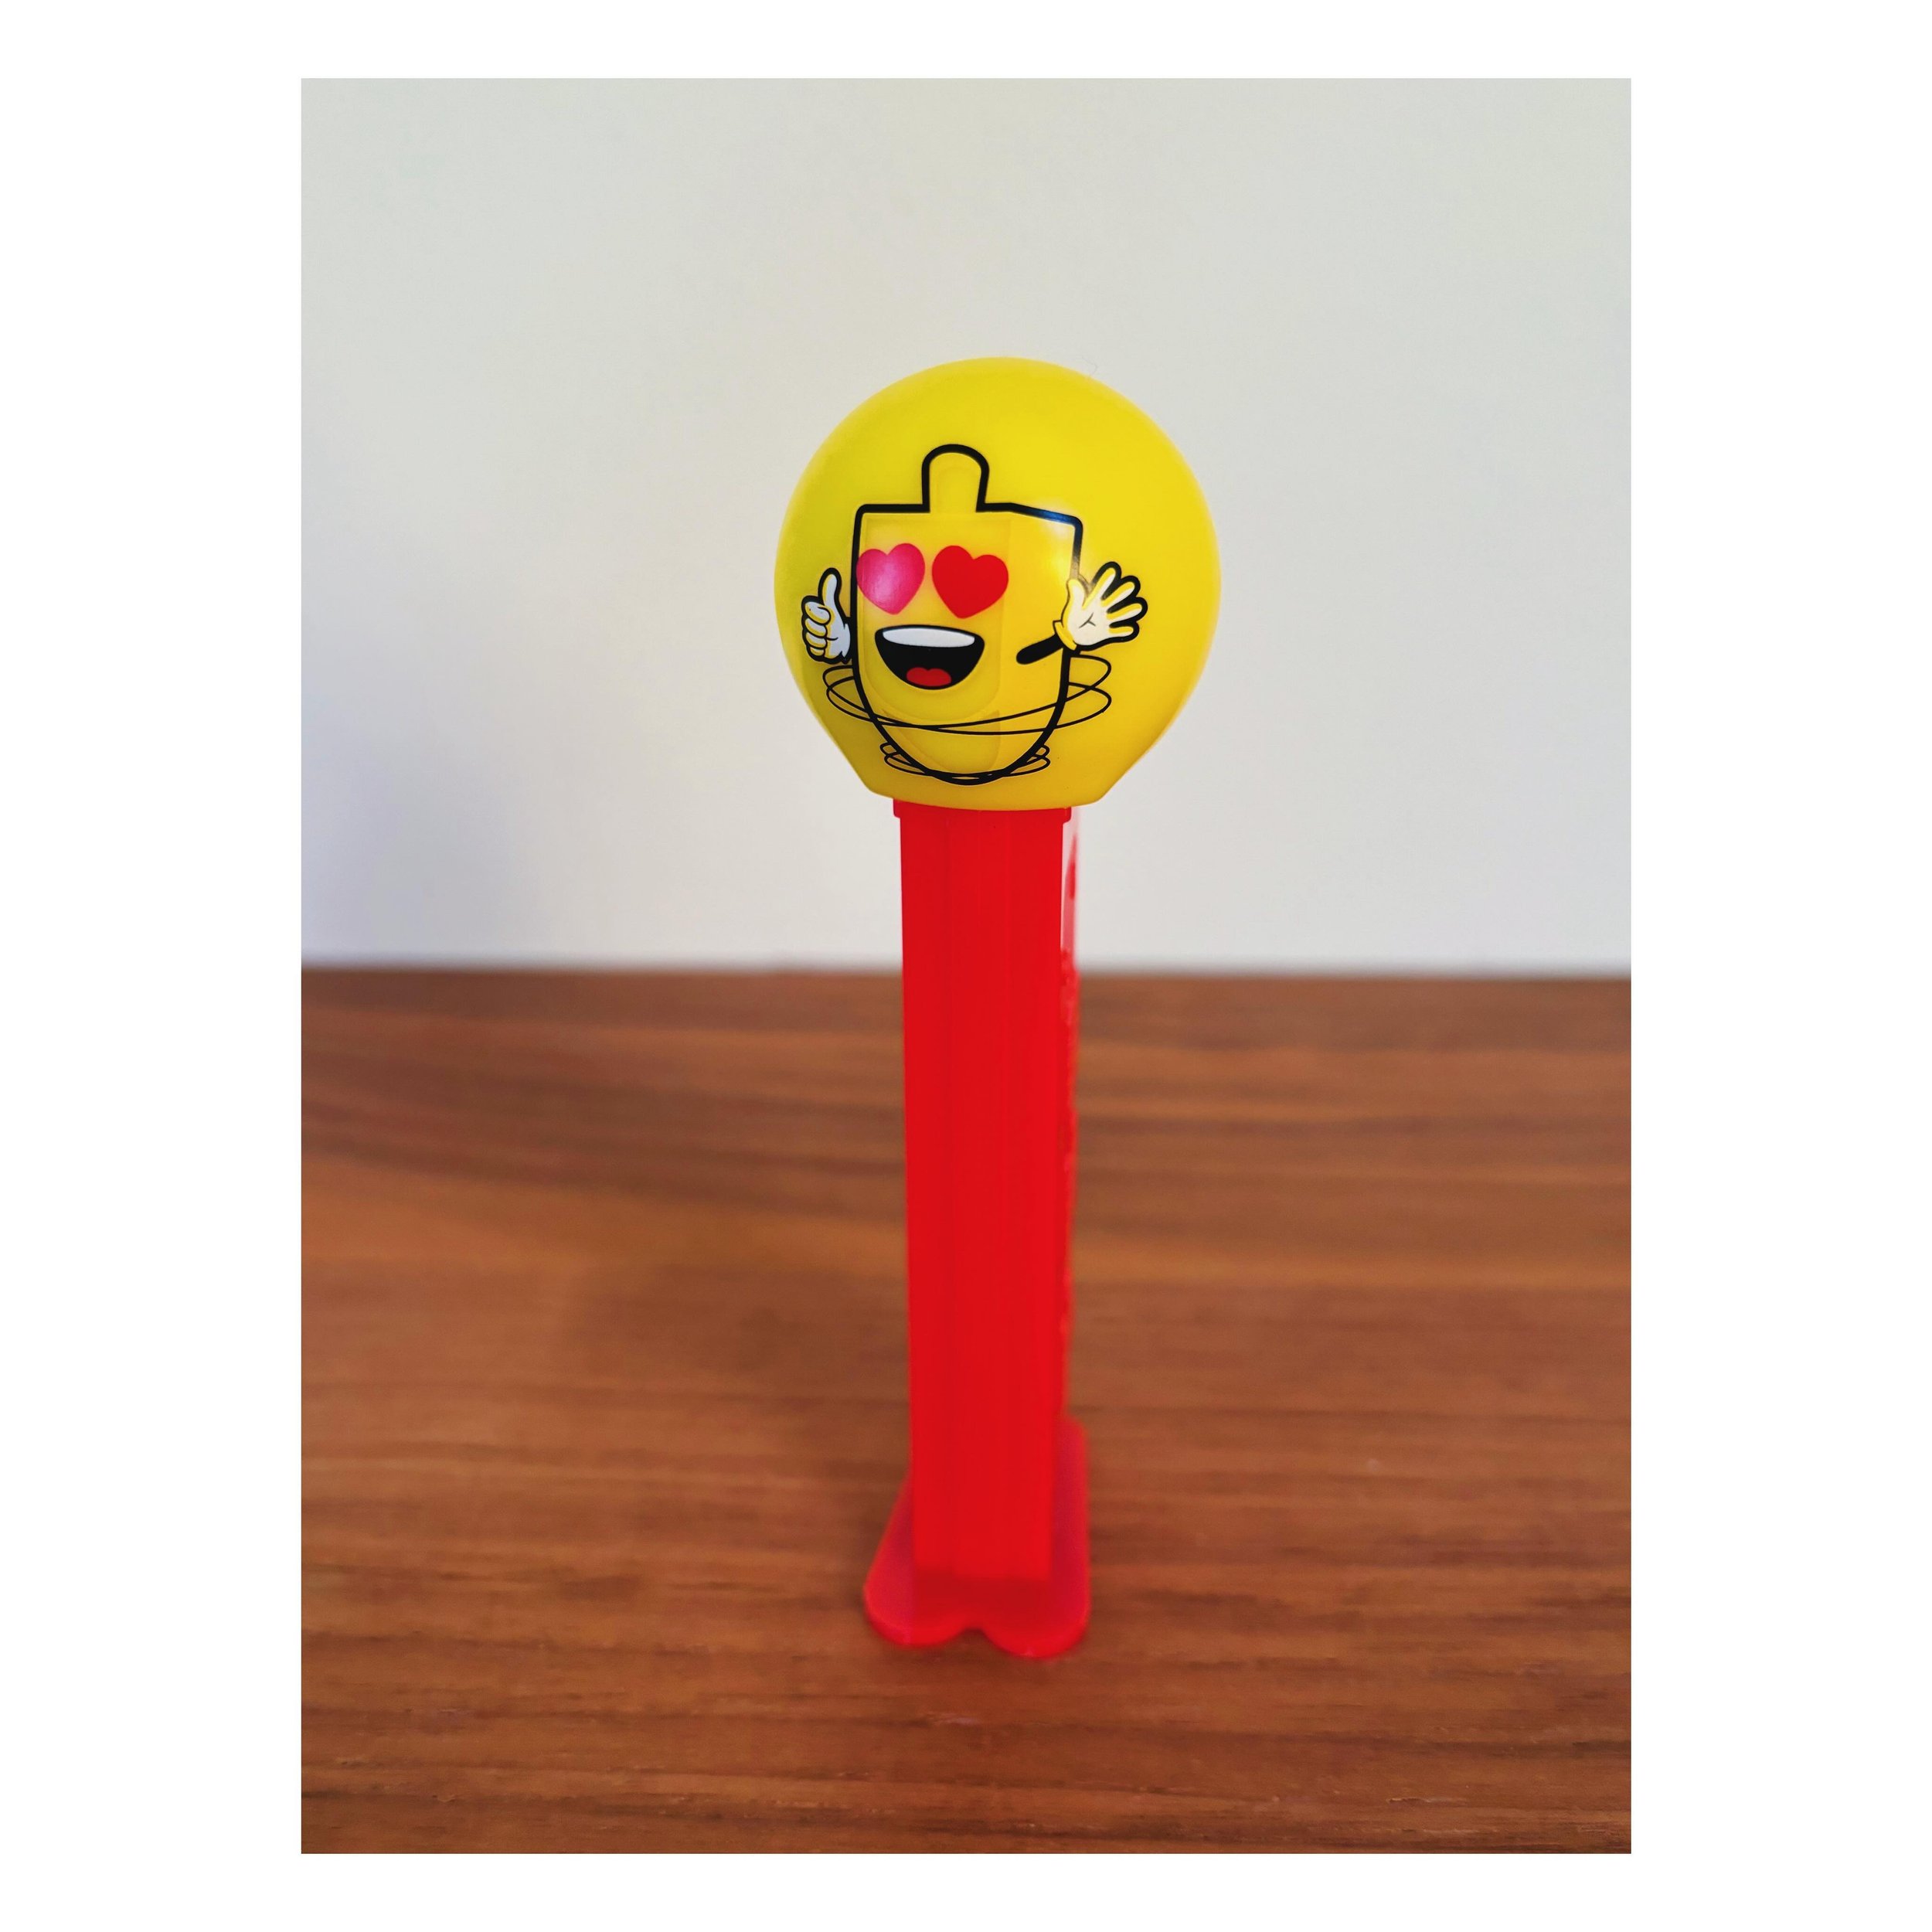 I made you out of clay 😍
.
.
#pez #pezdispenser #candy